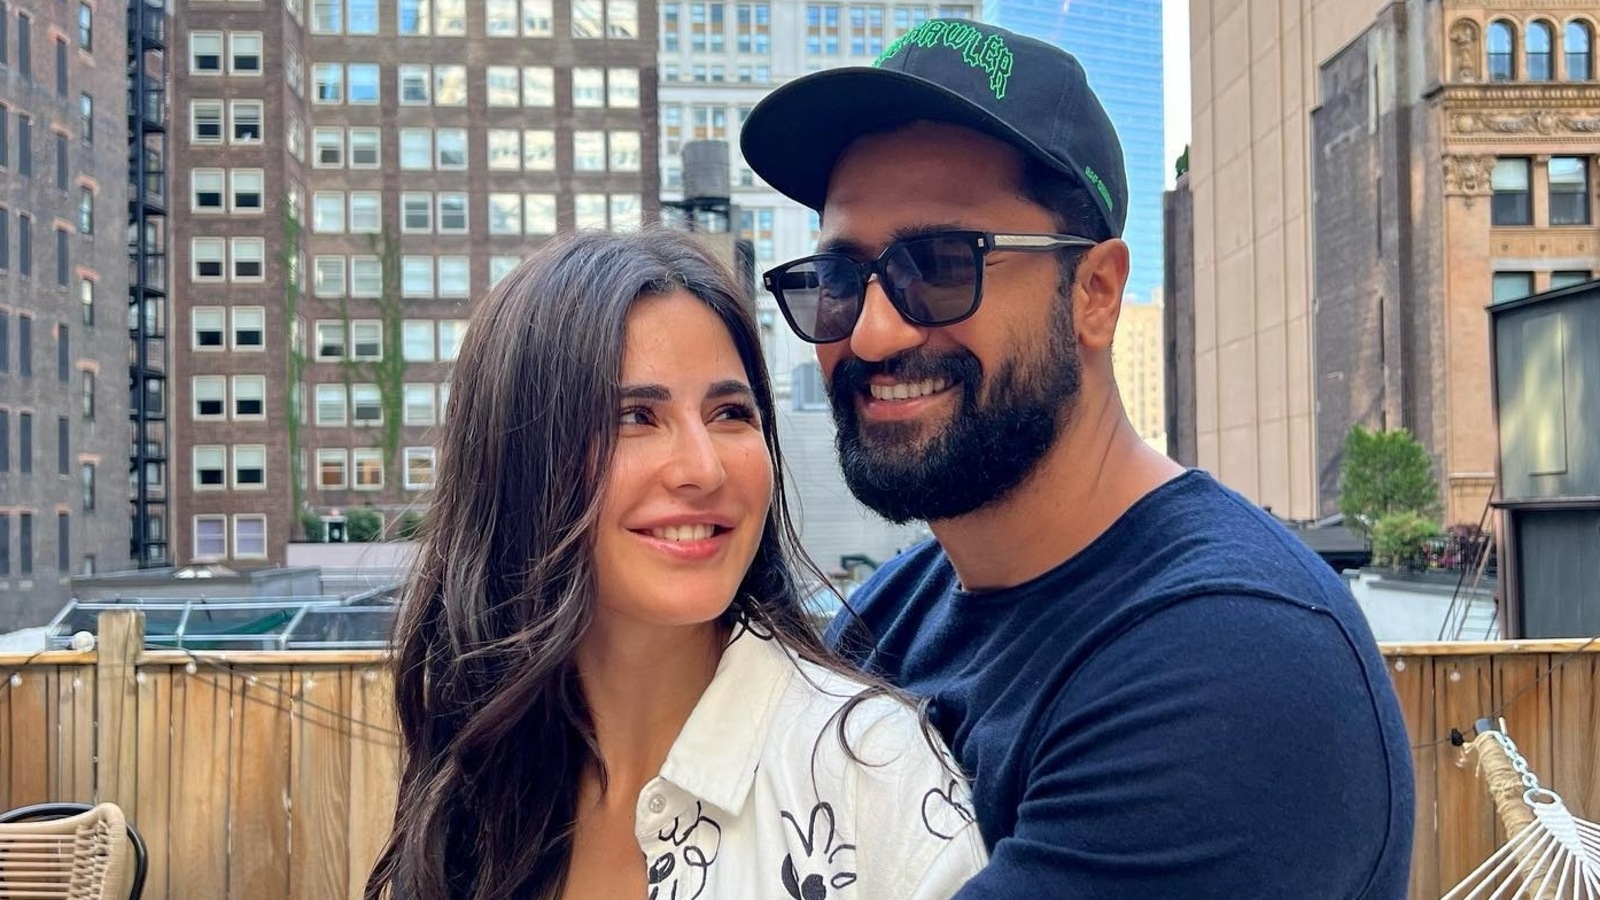 katrina-kaif-recalls-she-said-who-is-this-guy-when-she-saw-vicky-kaushal-for-the-first-time-in-manmarziyaan-promo